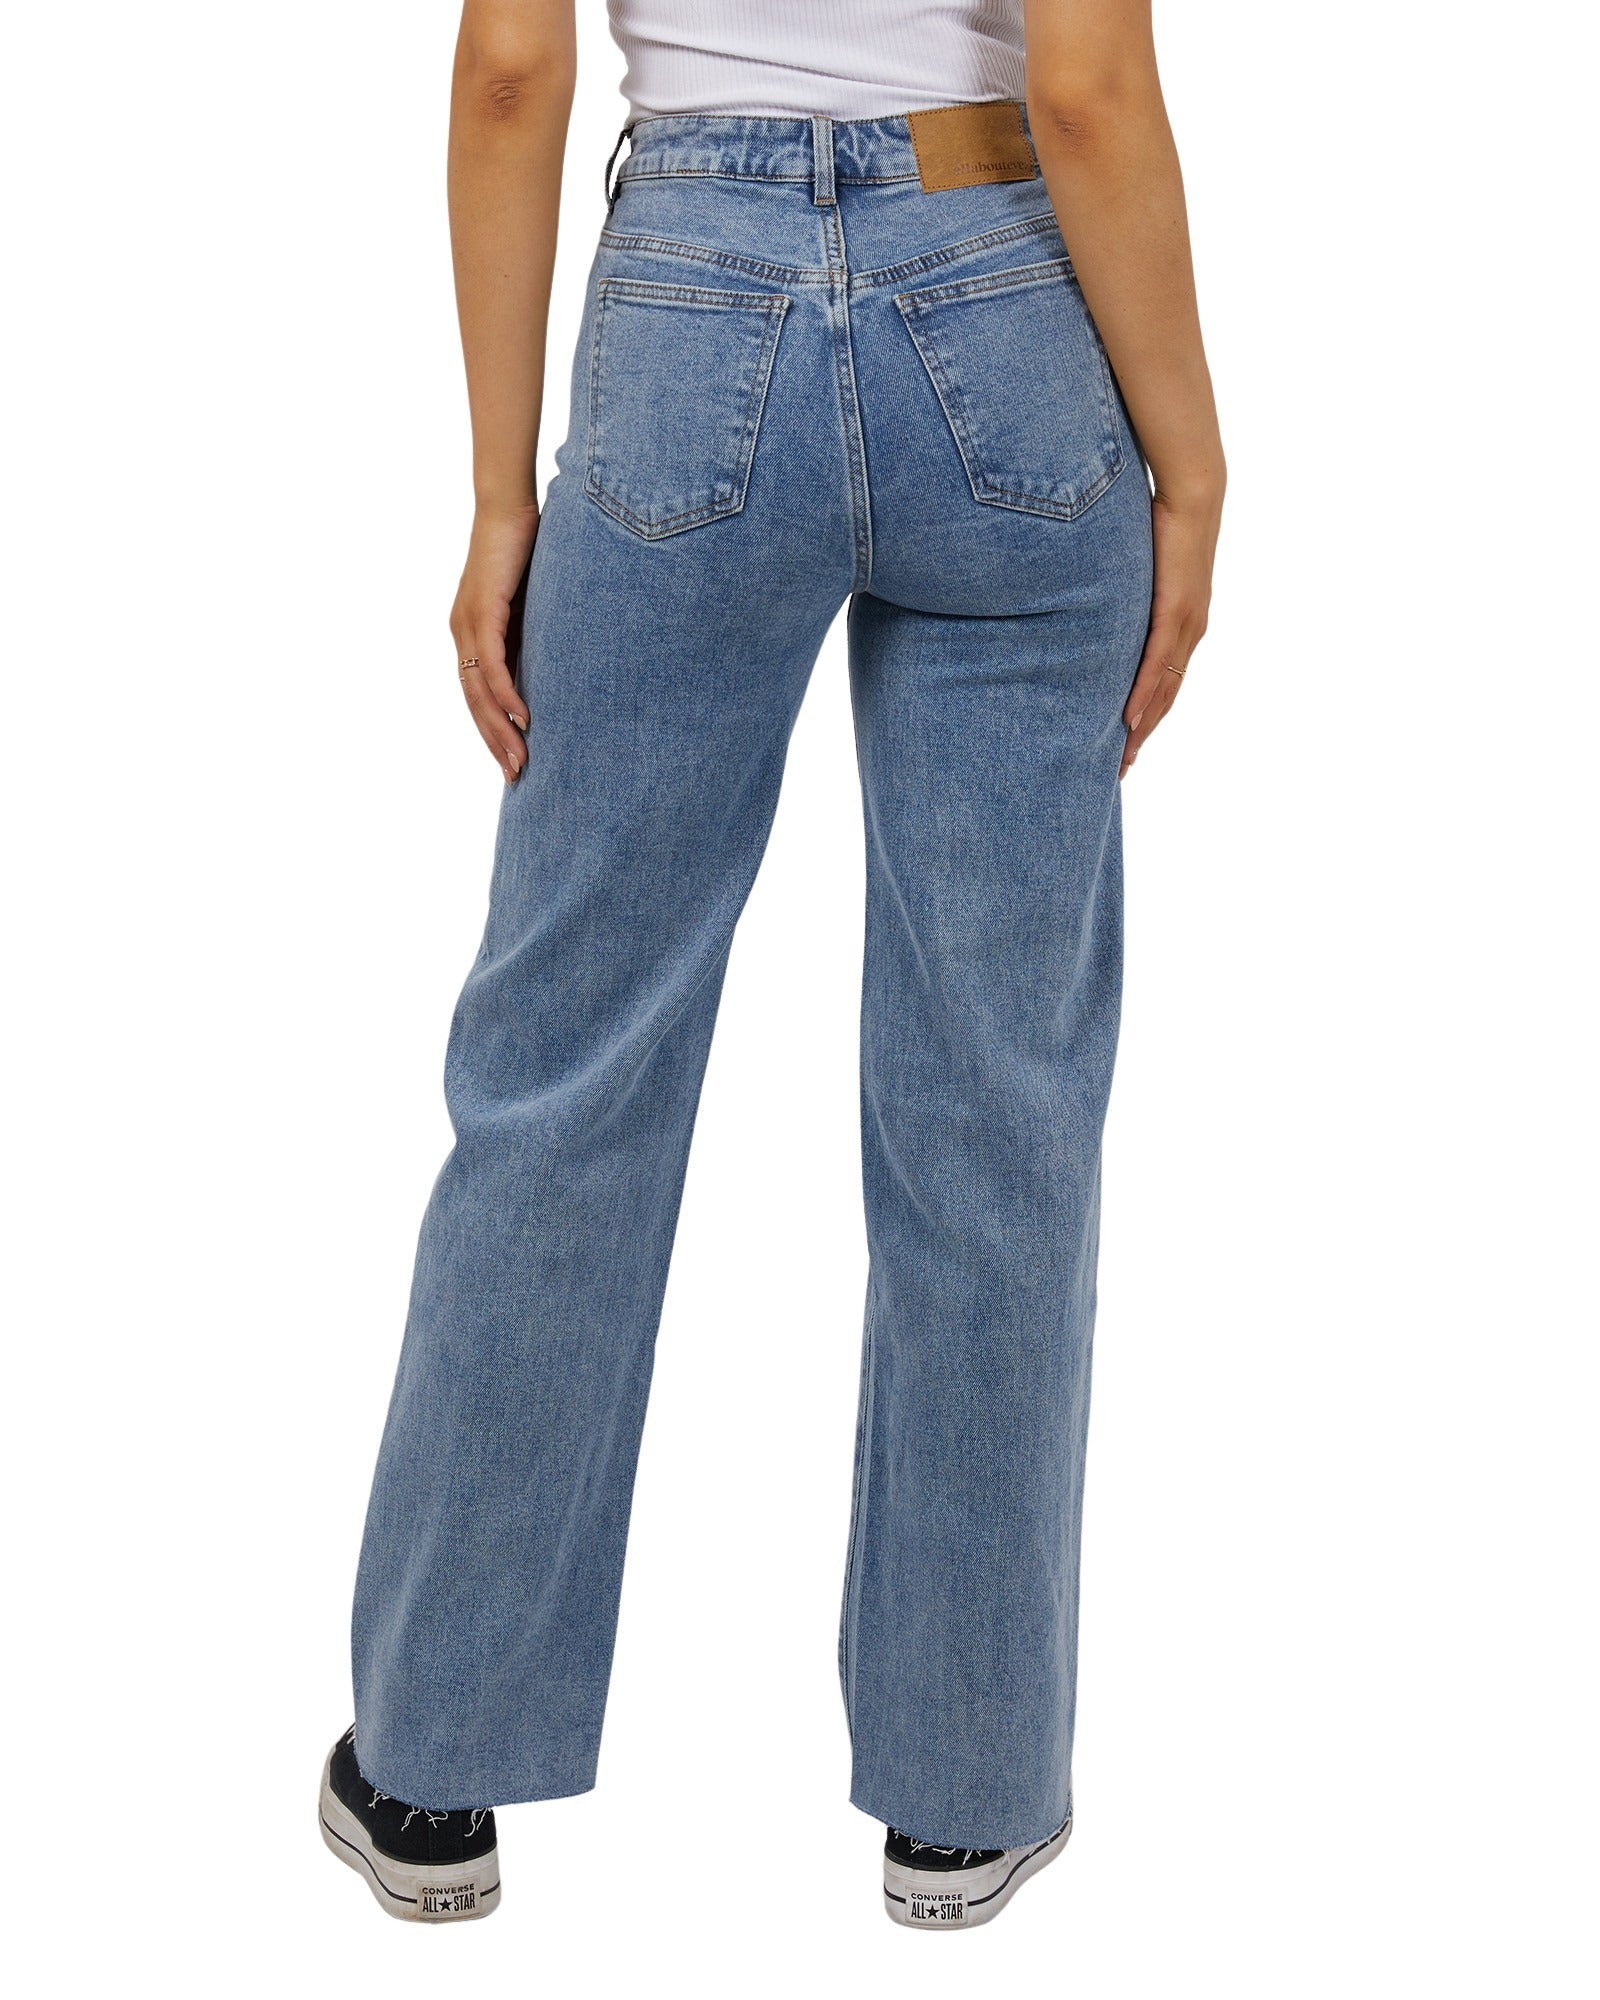 All About Eve - Skye Comfort Jean - Heritage Blue